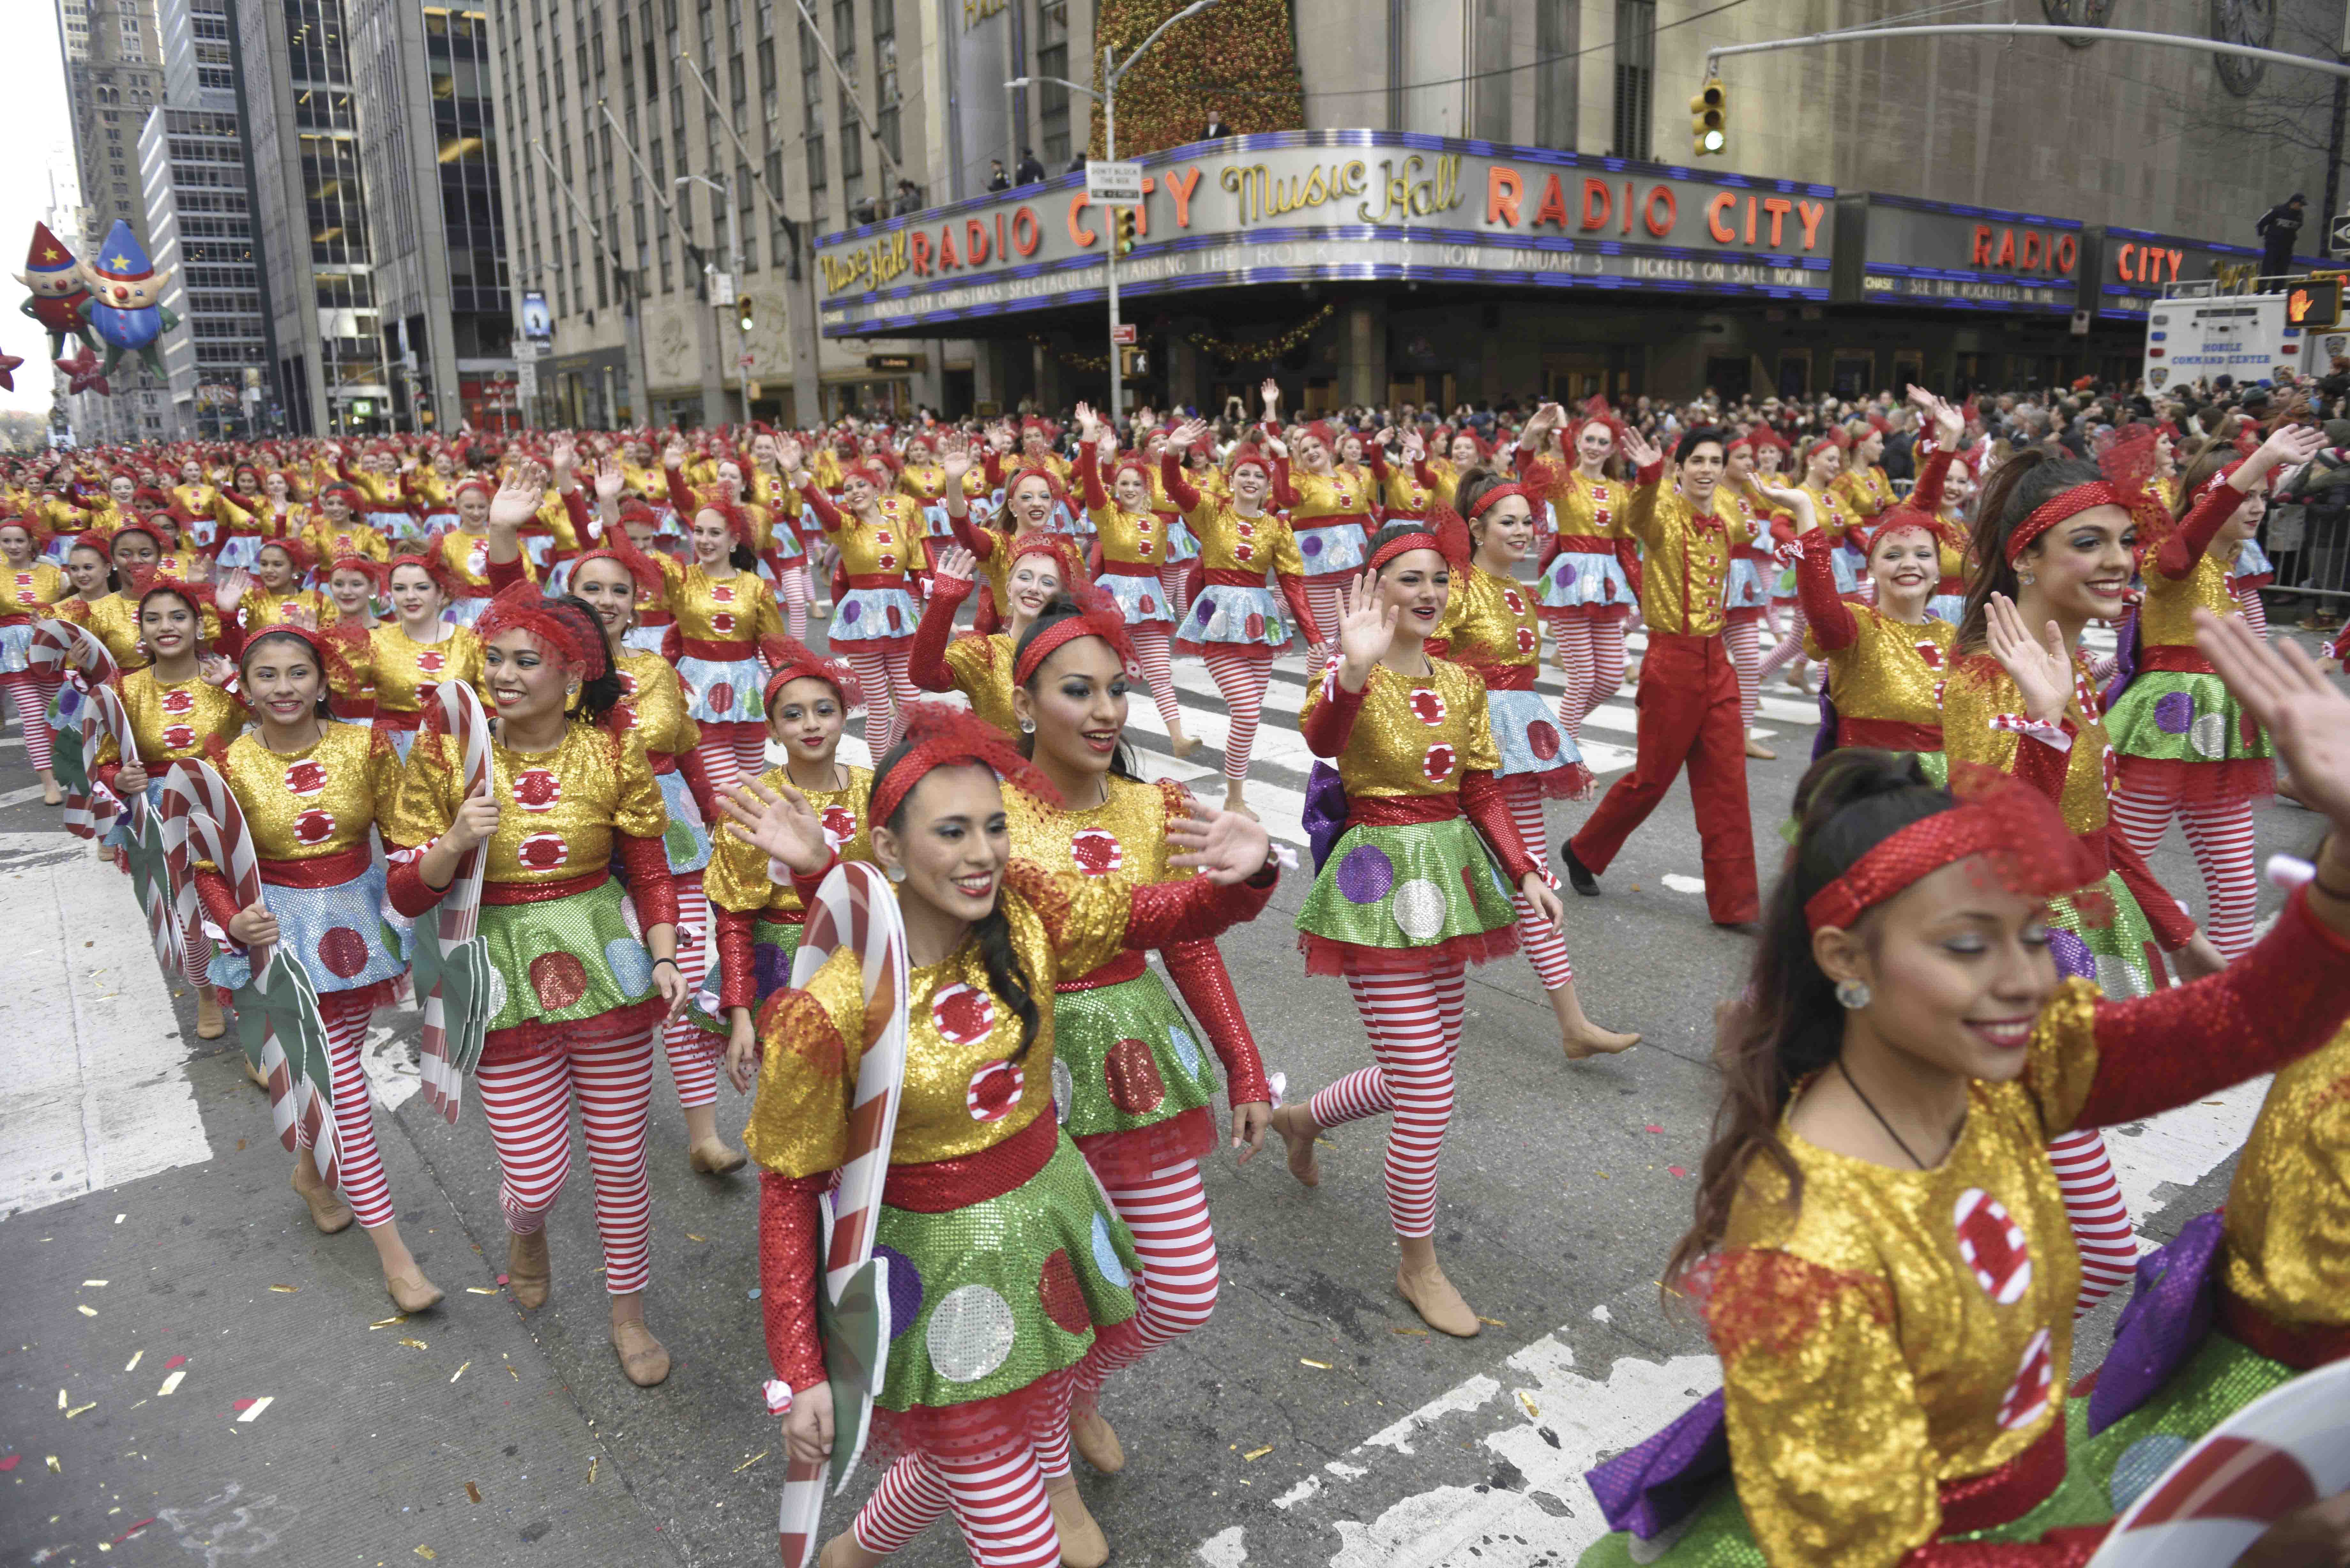 VARIETY SHOW: Drill team girls fill Sixth Avenue during Macy’s Thanksgiving Day Parade.